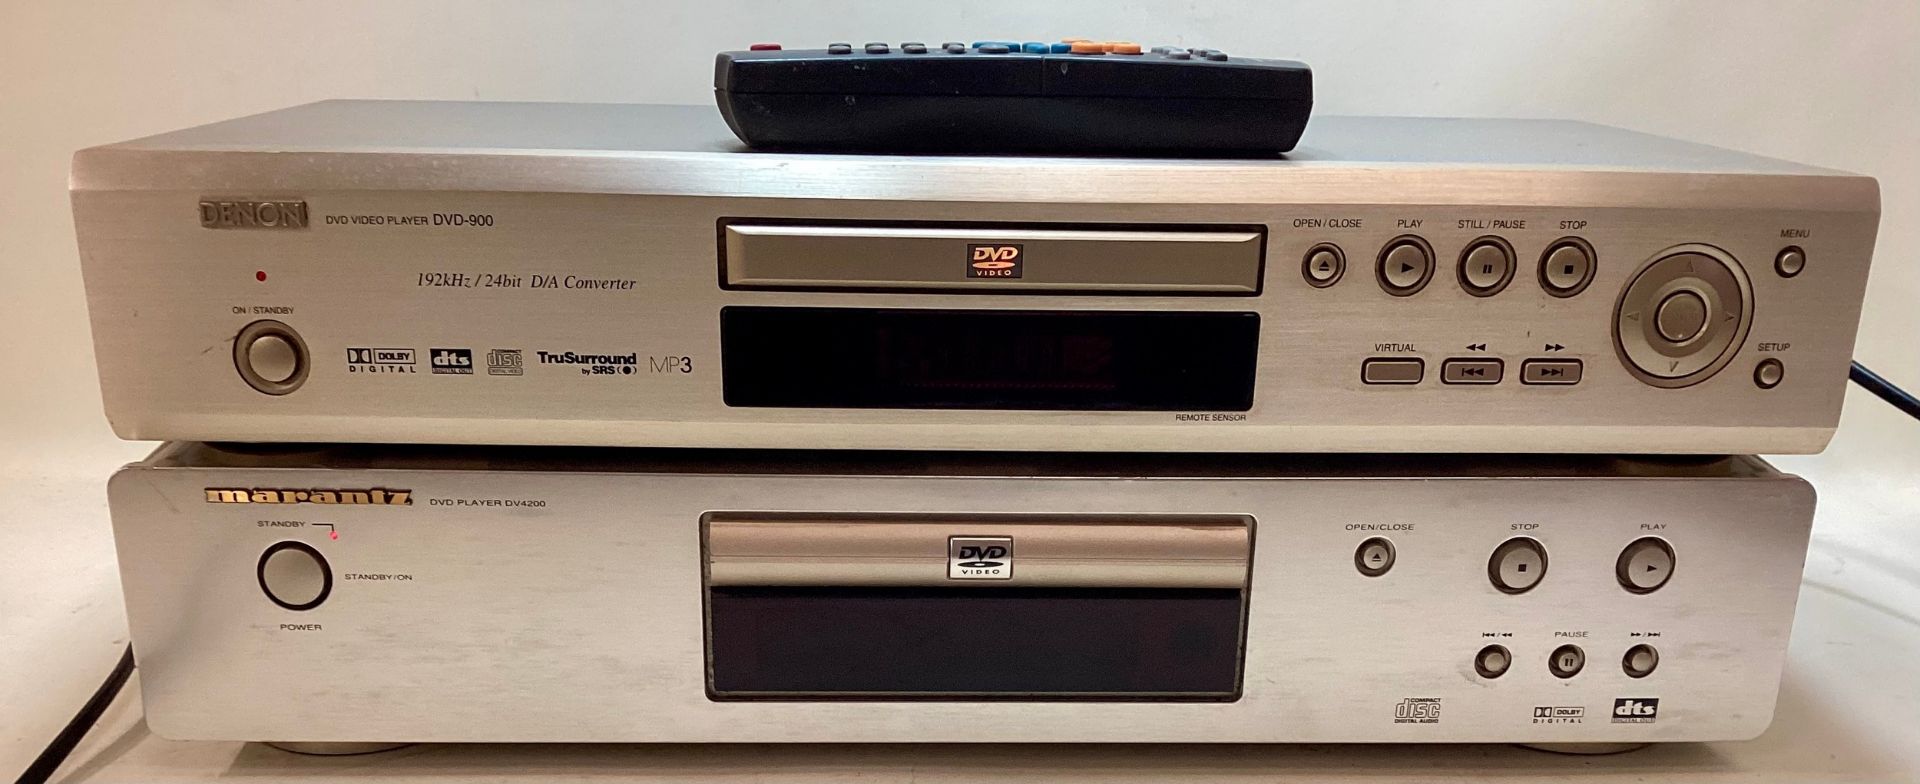 MARANTZ DVD PLAYERS X 2. Models here are DV4200/N1G and DVD-900. Both have their standby lights on